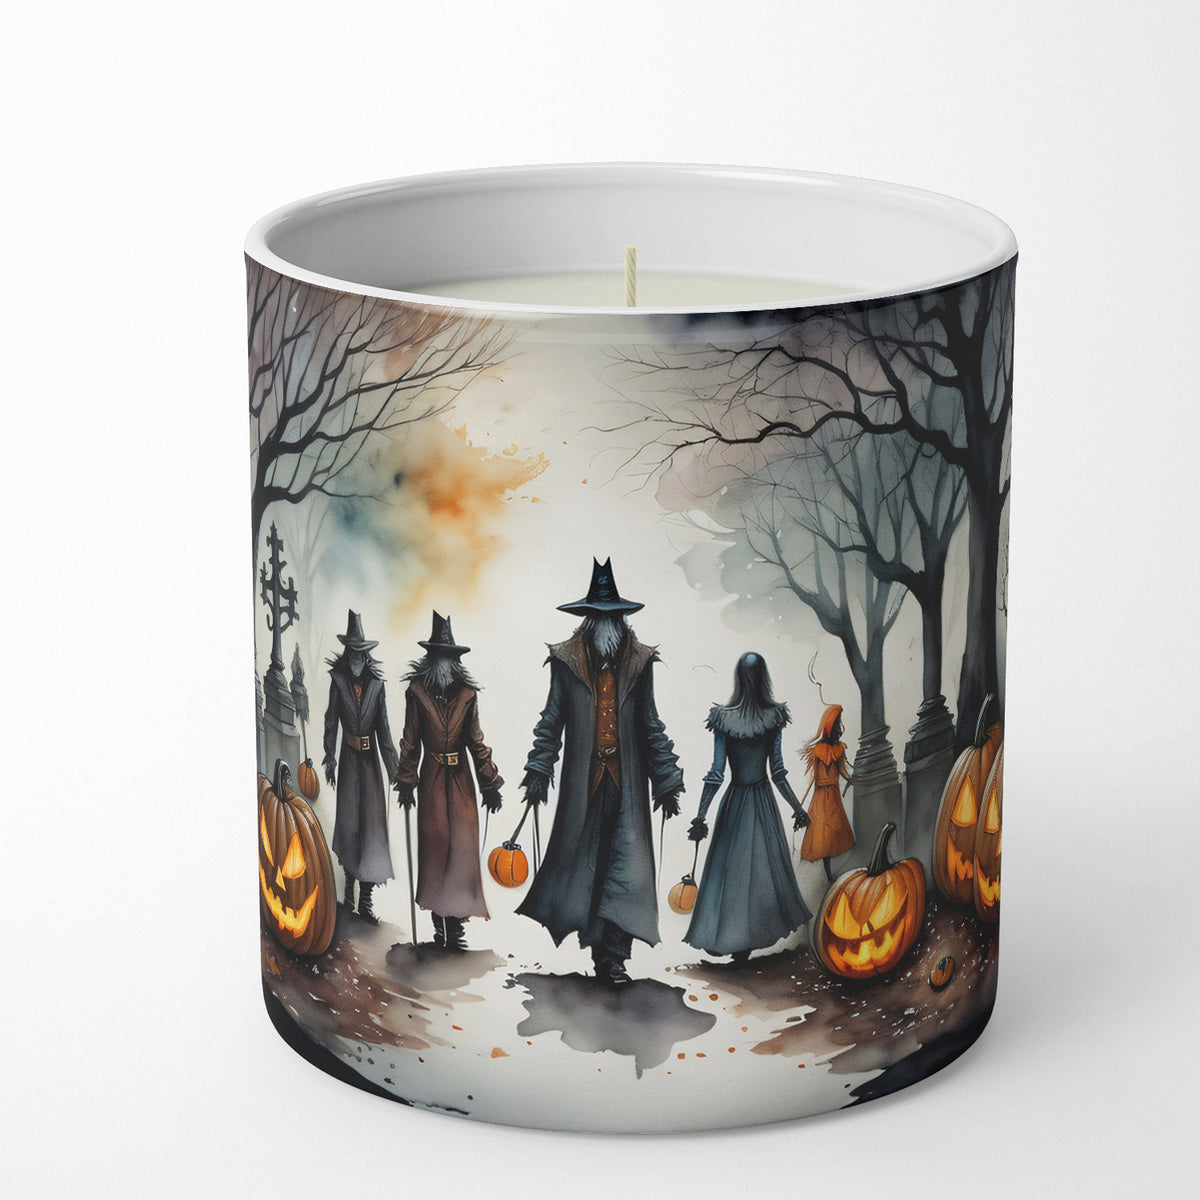 Buy this Vampires Spooky Halloween Decorative Soy Candle